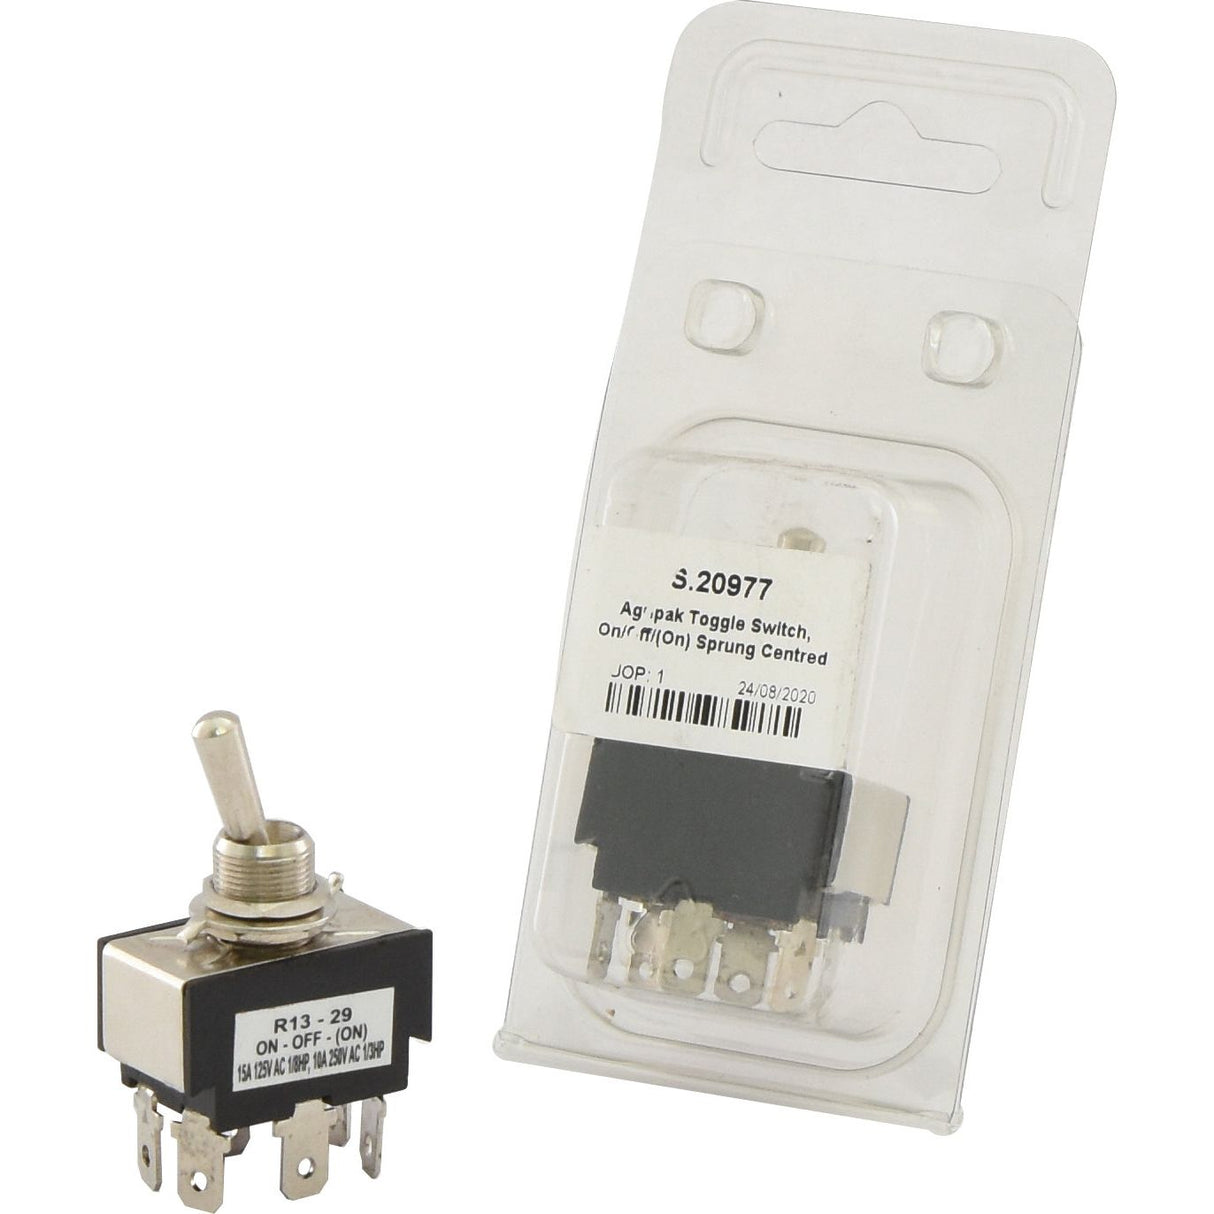 Agripak Toggle Switch, On/Off/(On) Sprung Centred
 - S.20977 - Farming Parts